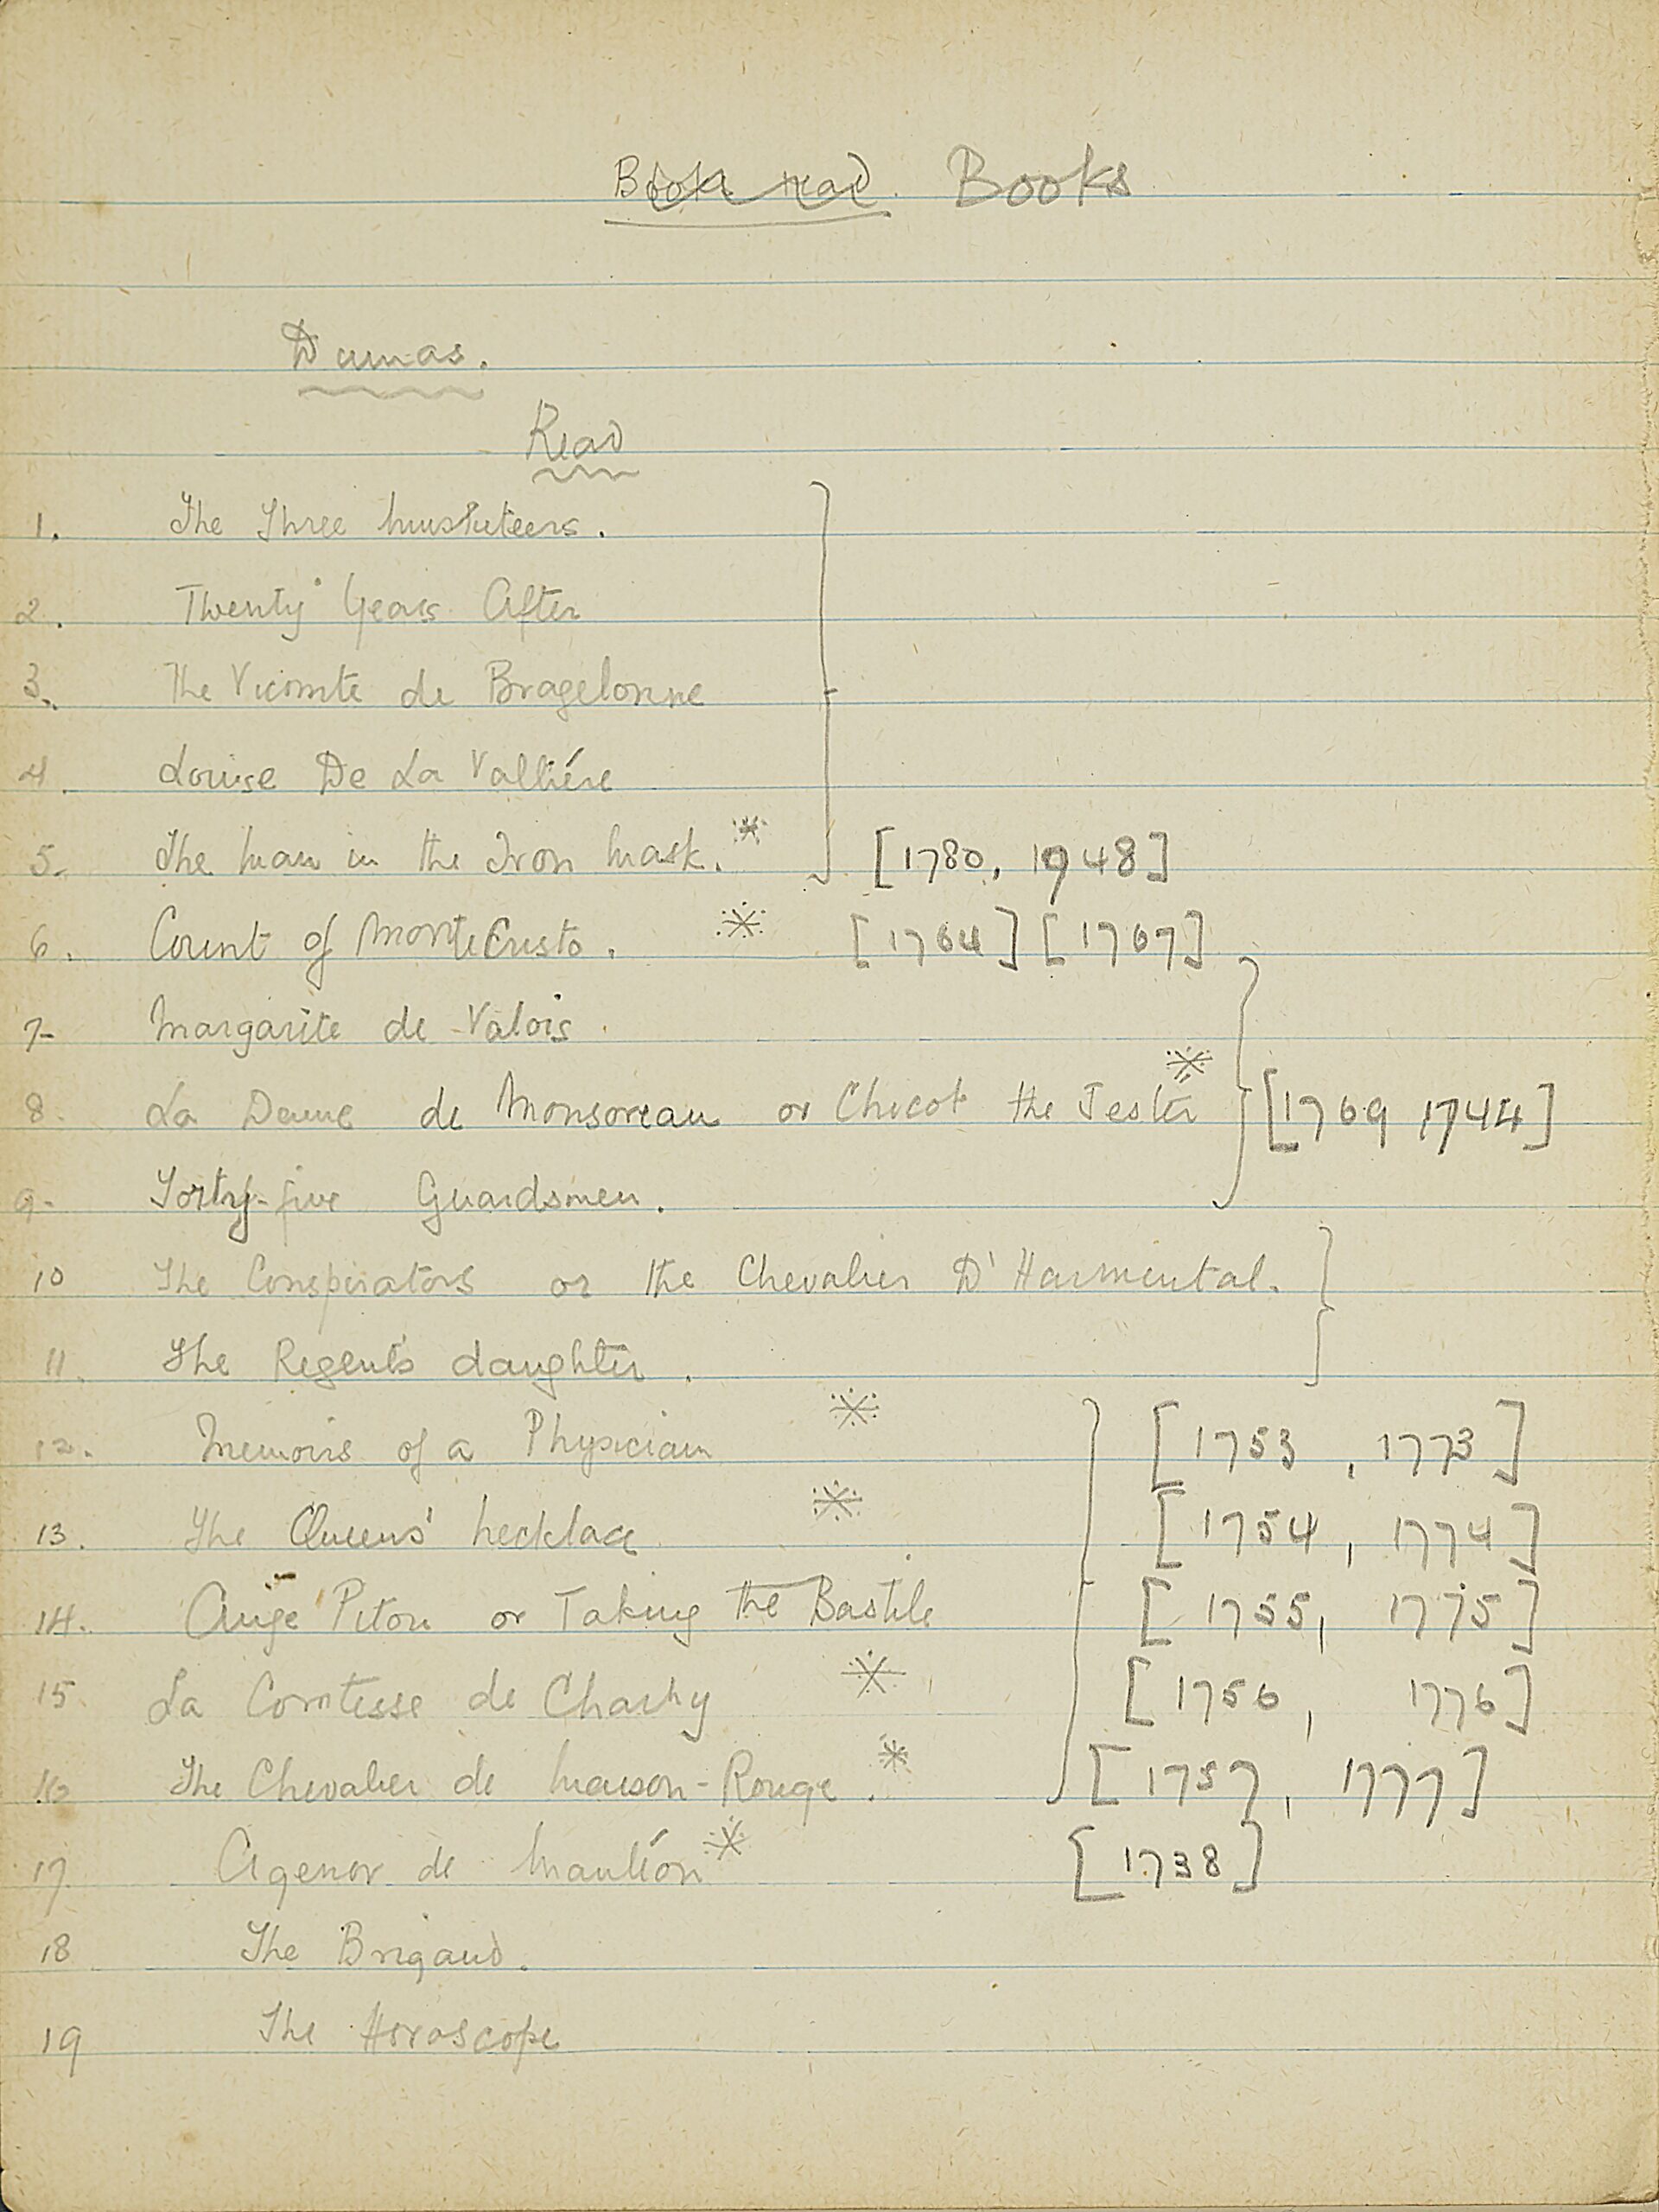 Page of a notebook in which McFarlane has written, in pencil, a reading list. The list consists of 19 books, all under the heading 'read'